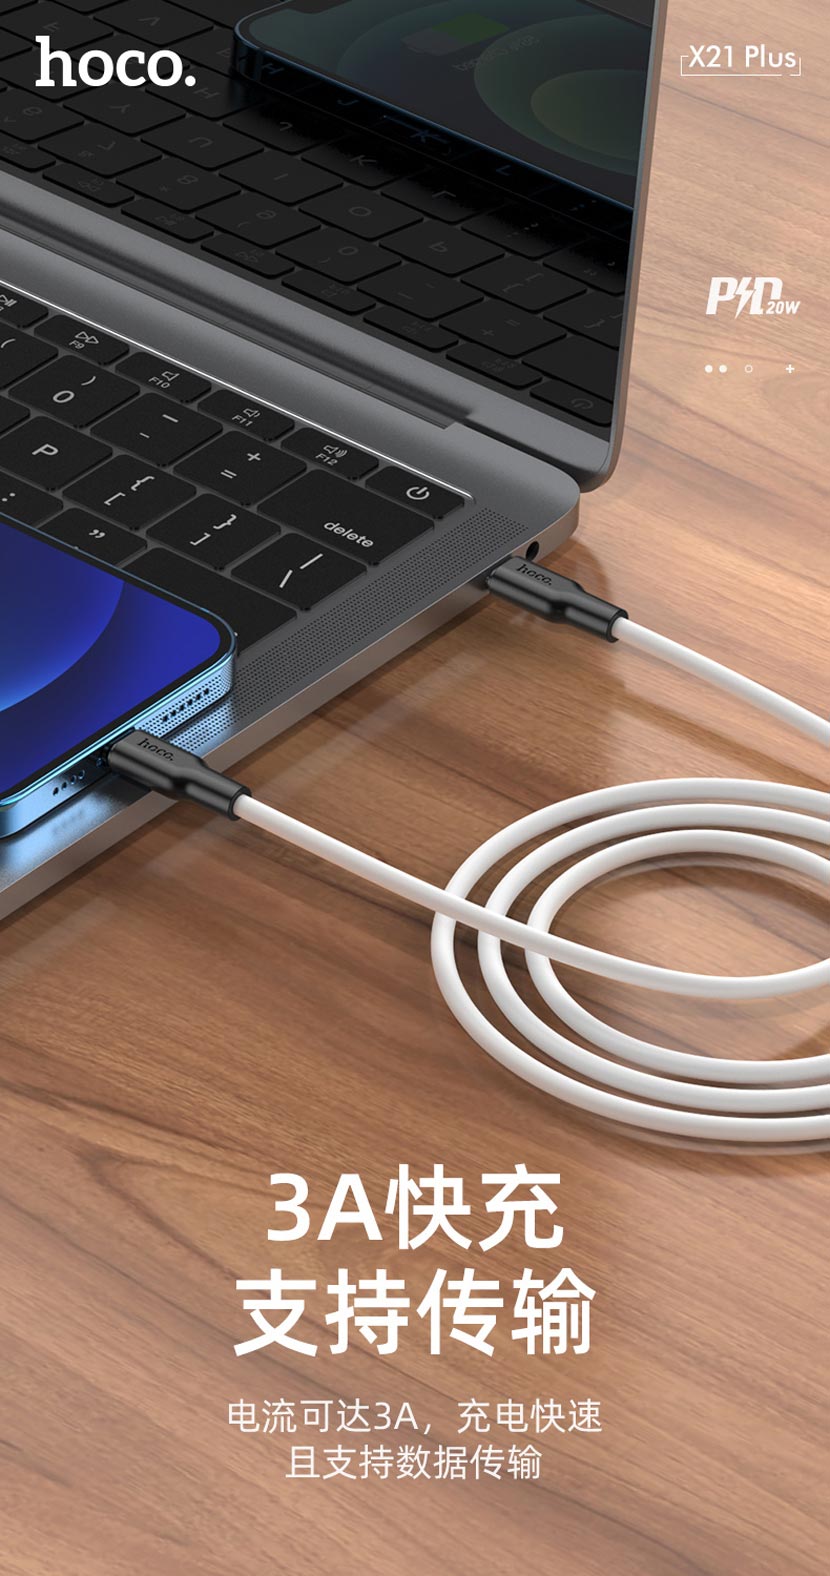 hoco news x21 plus silicone pd charging data cable 3a cn